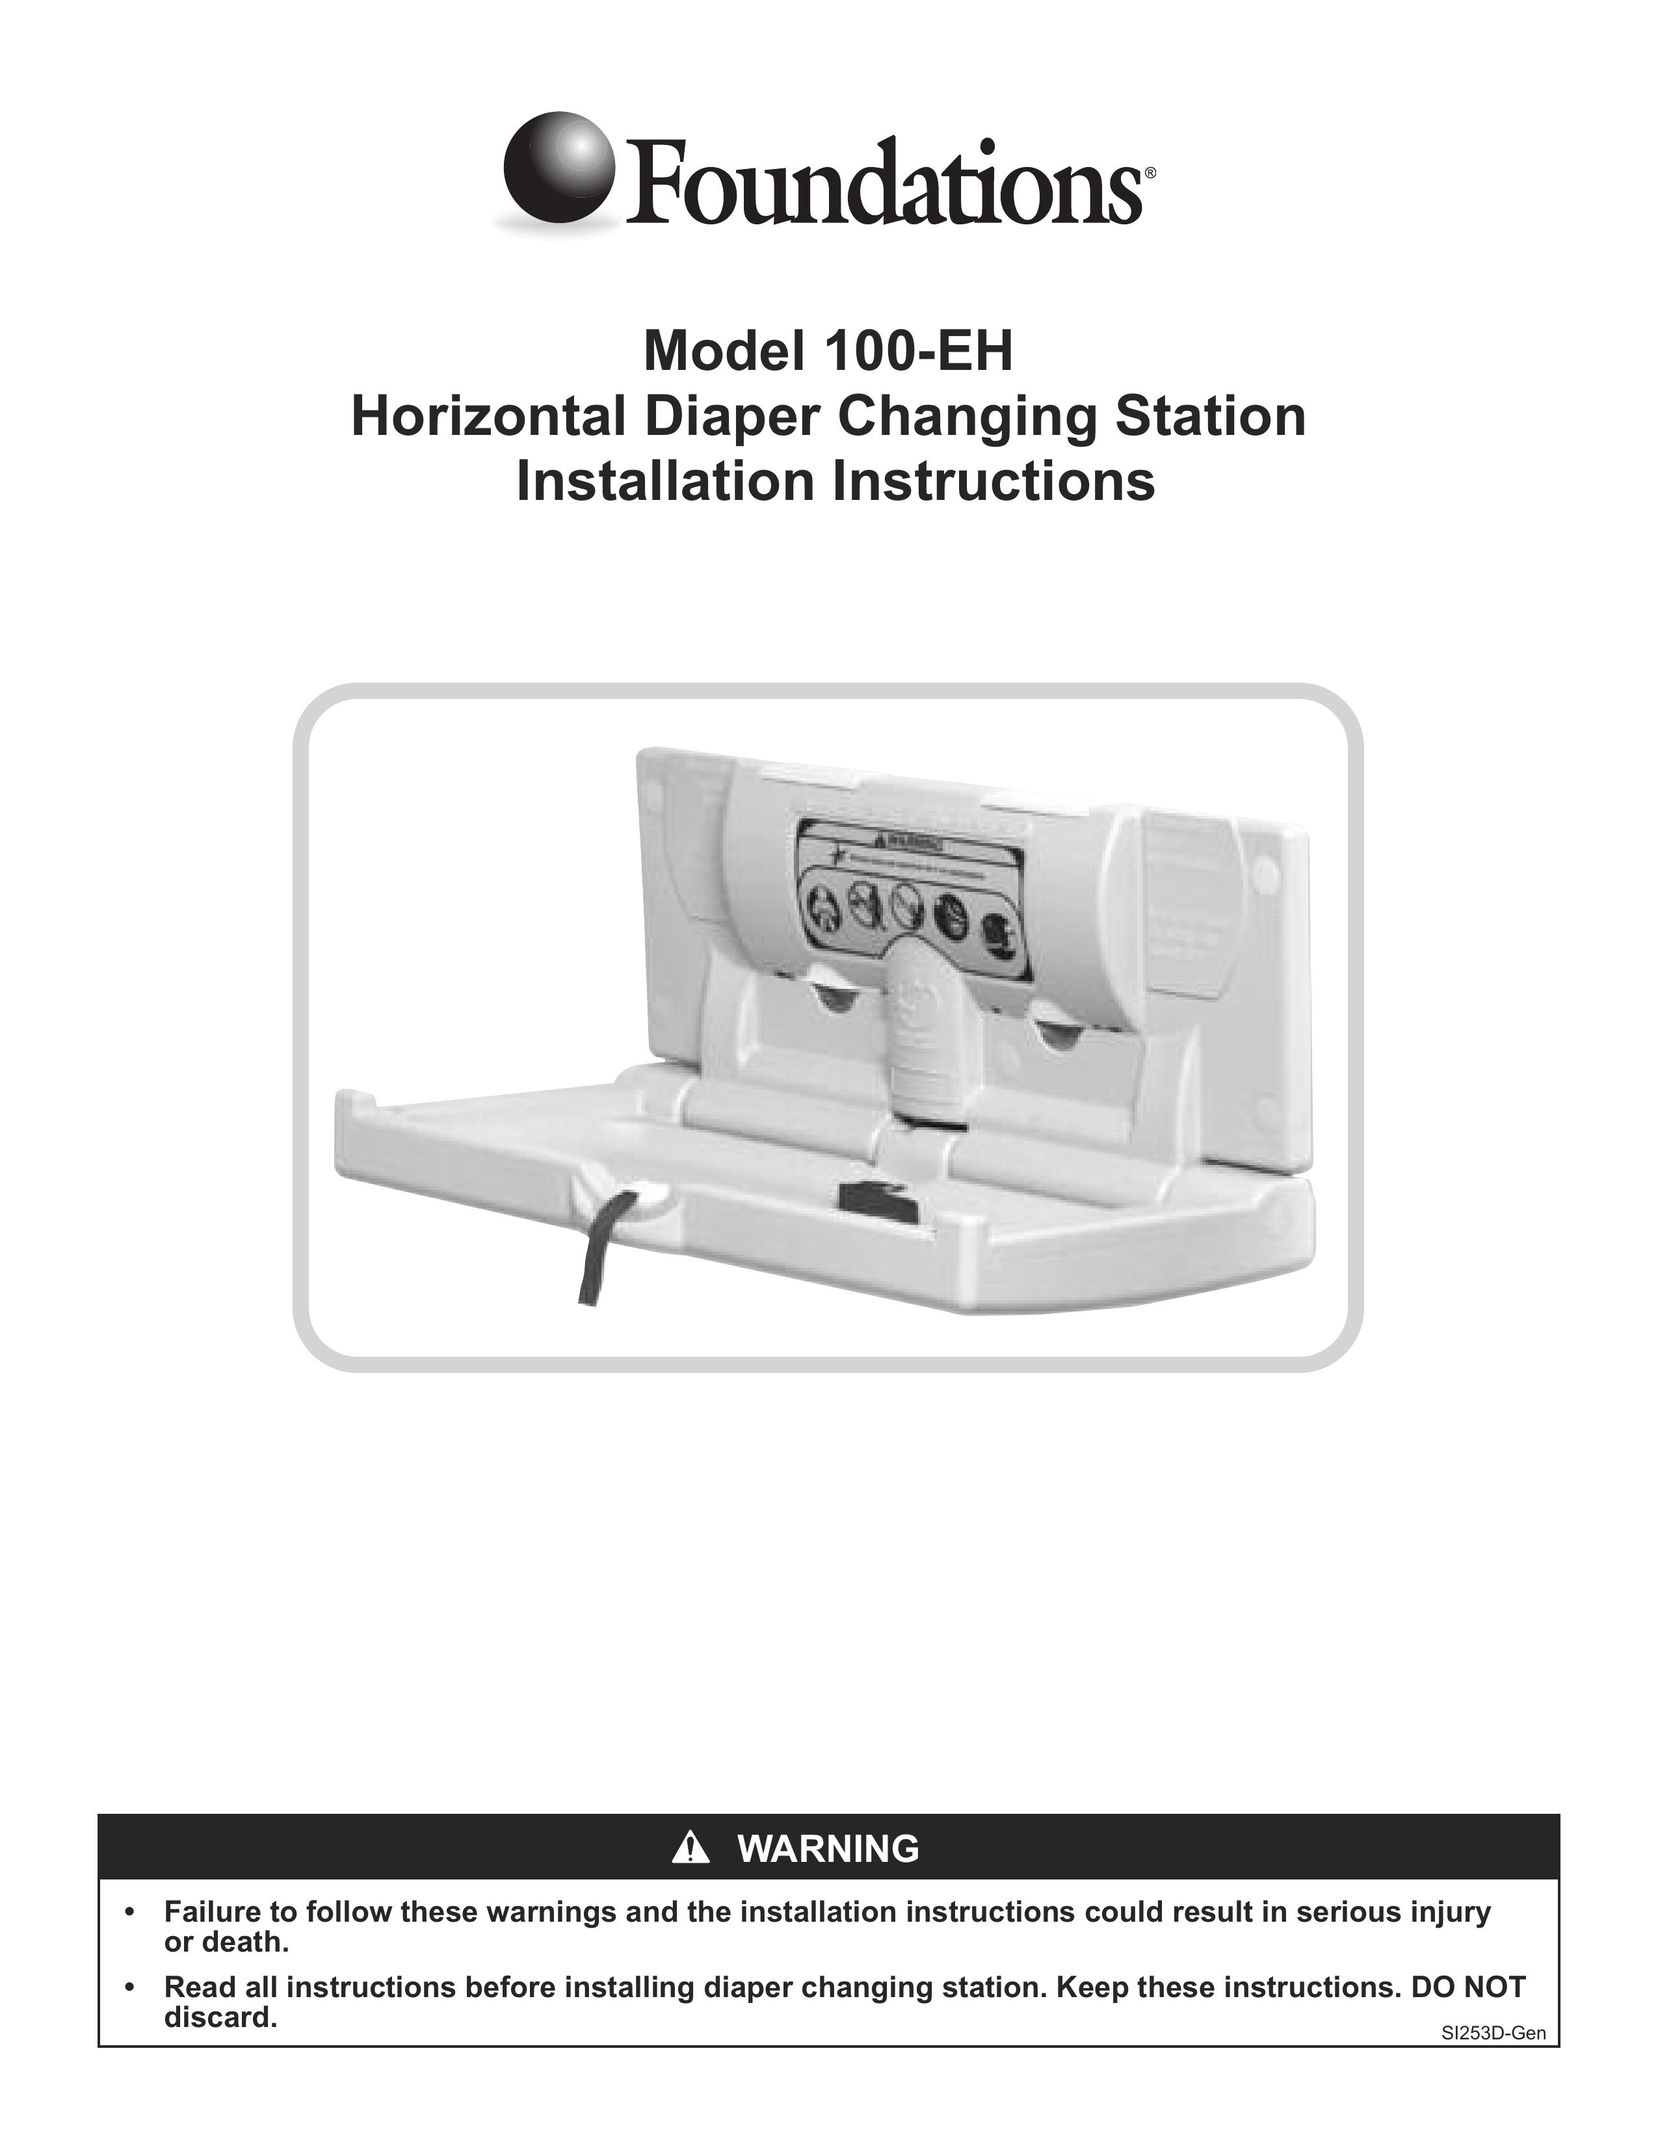 Foundations 100-EH Baby Furniture User Manual